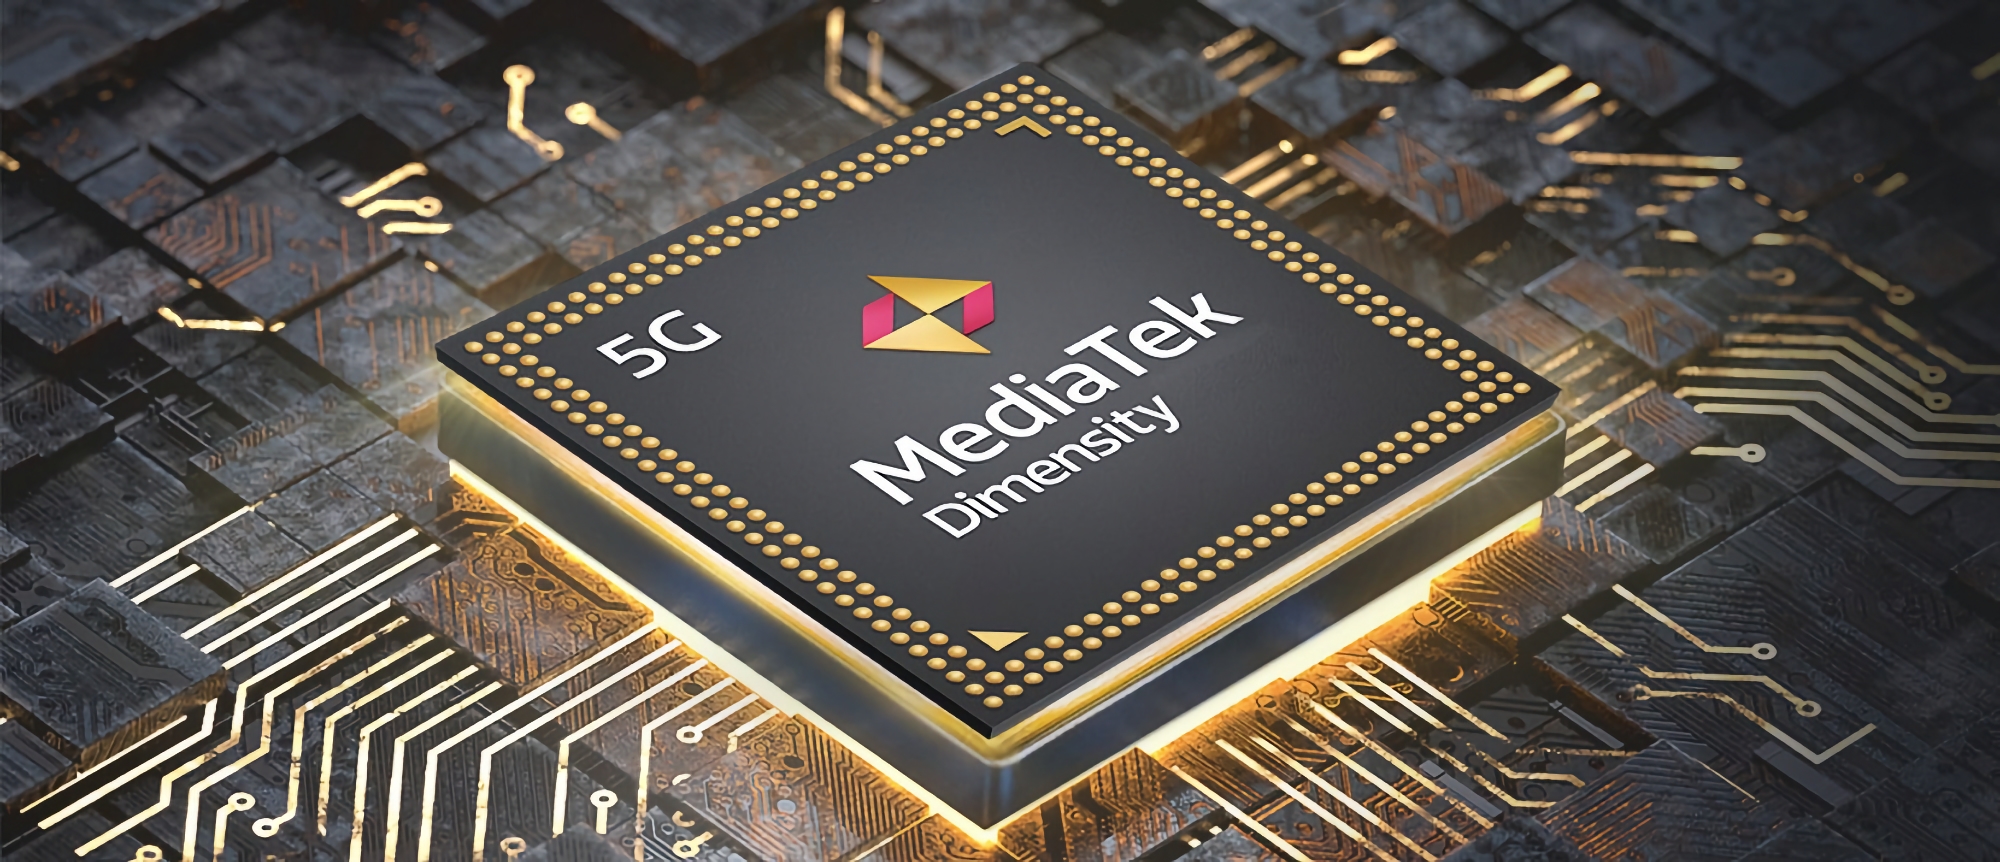 Dimensity 8100 successor: MediaTek is about to release the Dimensity 8200 processor, and Xiaomi and vivo smartphones will be the first to get it